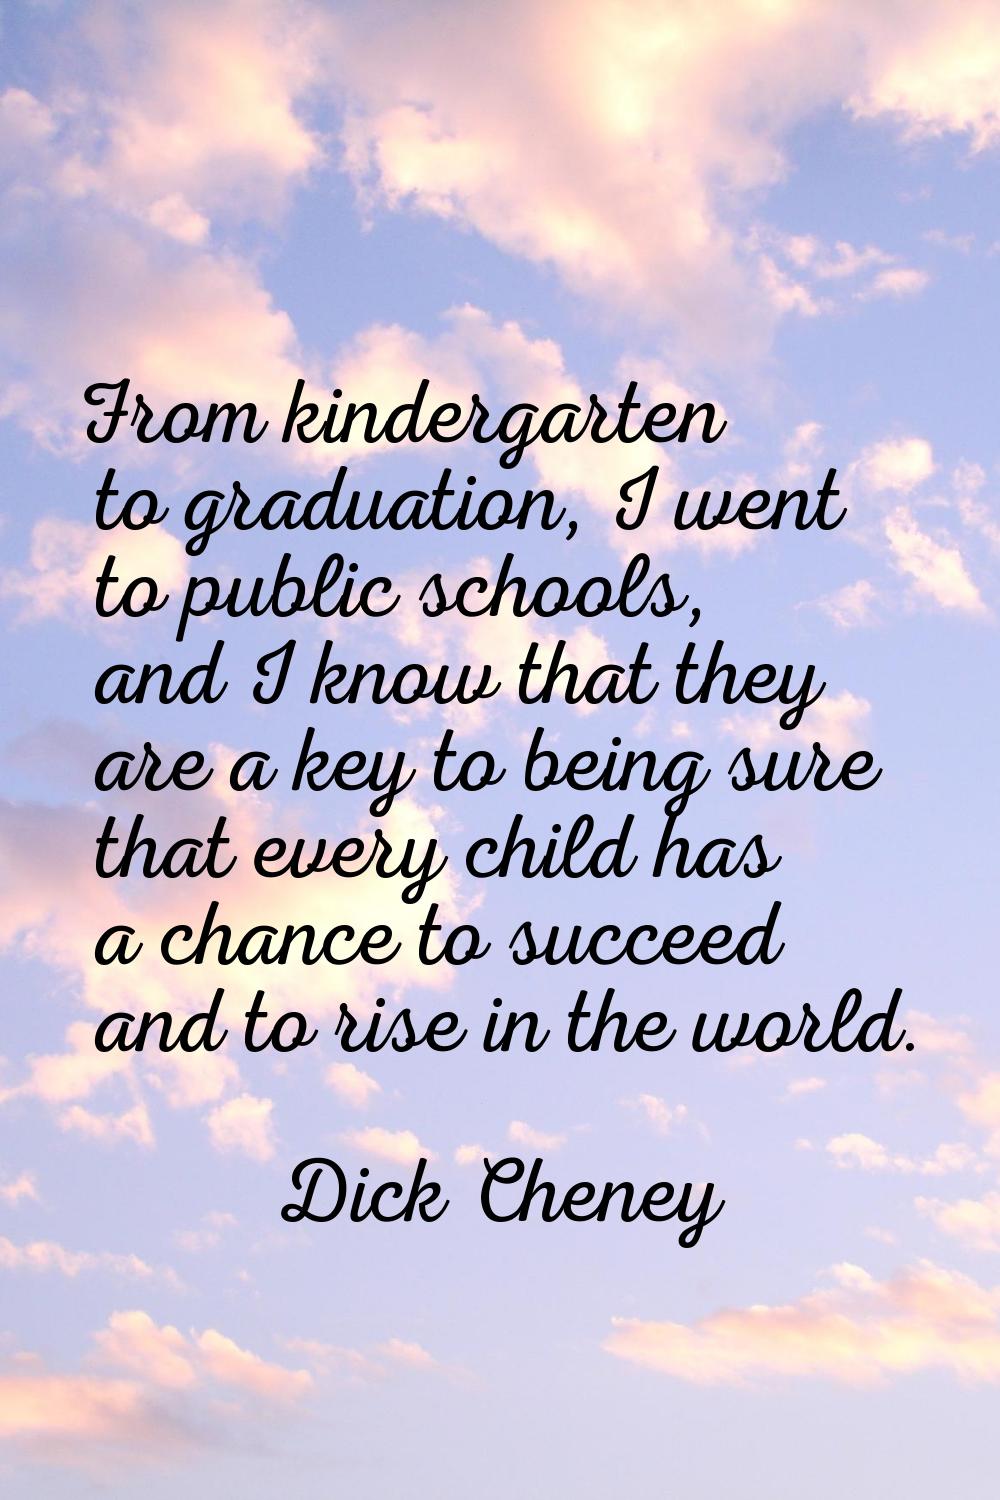 From kindergarten to graduation, I went to public schools, and I know that they are a key to being 